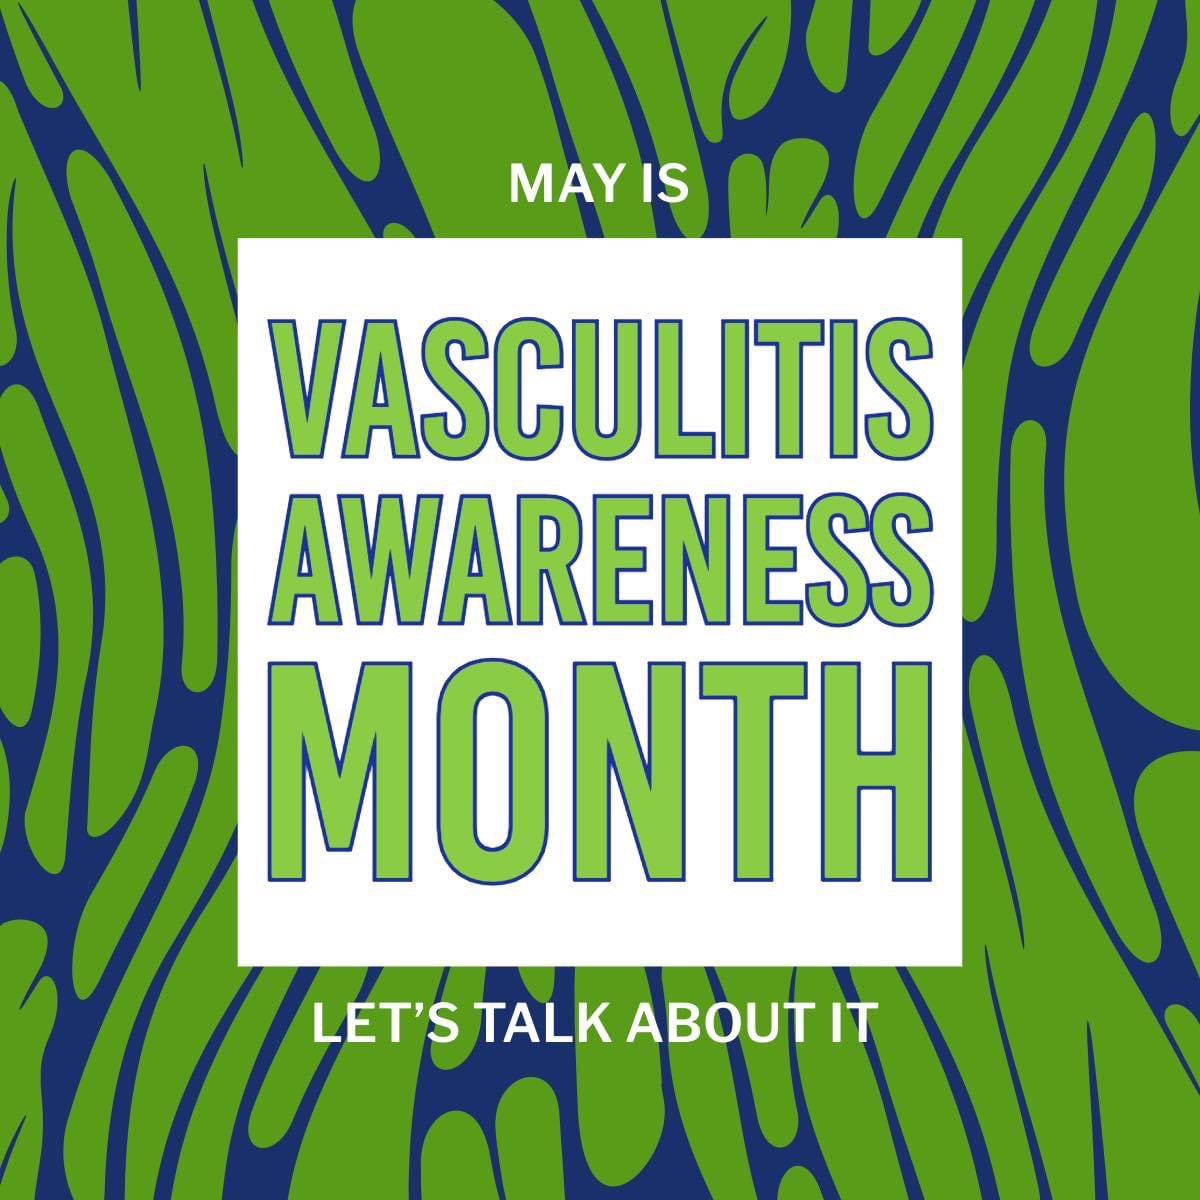 May - Day 7 Let’s talk about #Vasculitis What is Vasculitis? A Rare #Rheumatic #Autoimmune Disease. Take a moment to watch this video youtube.com/watch?v=qMaVLz…